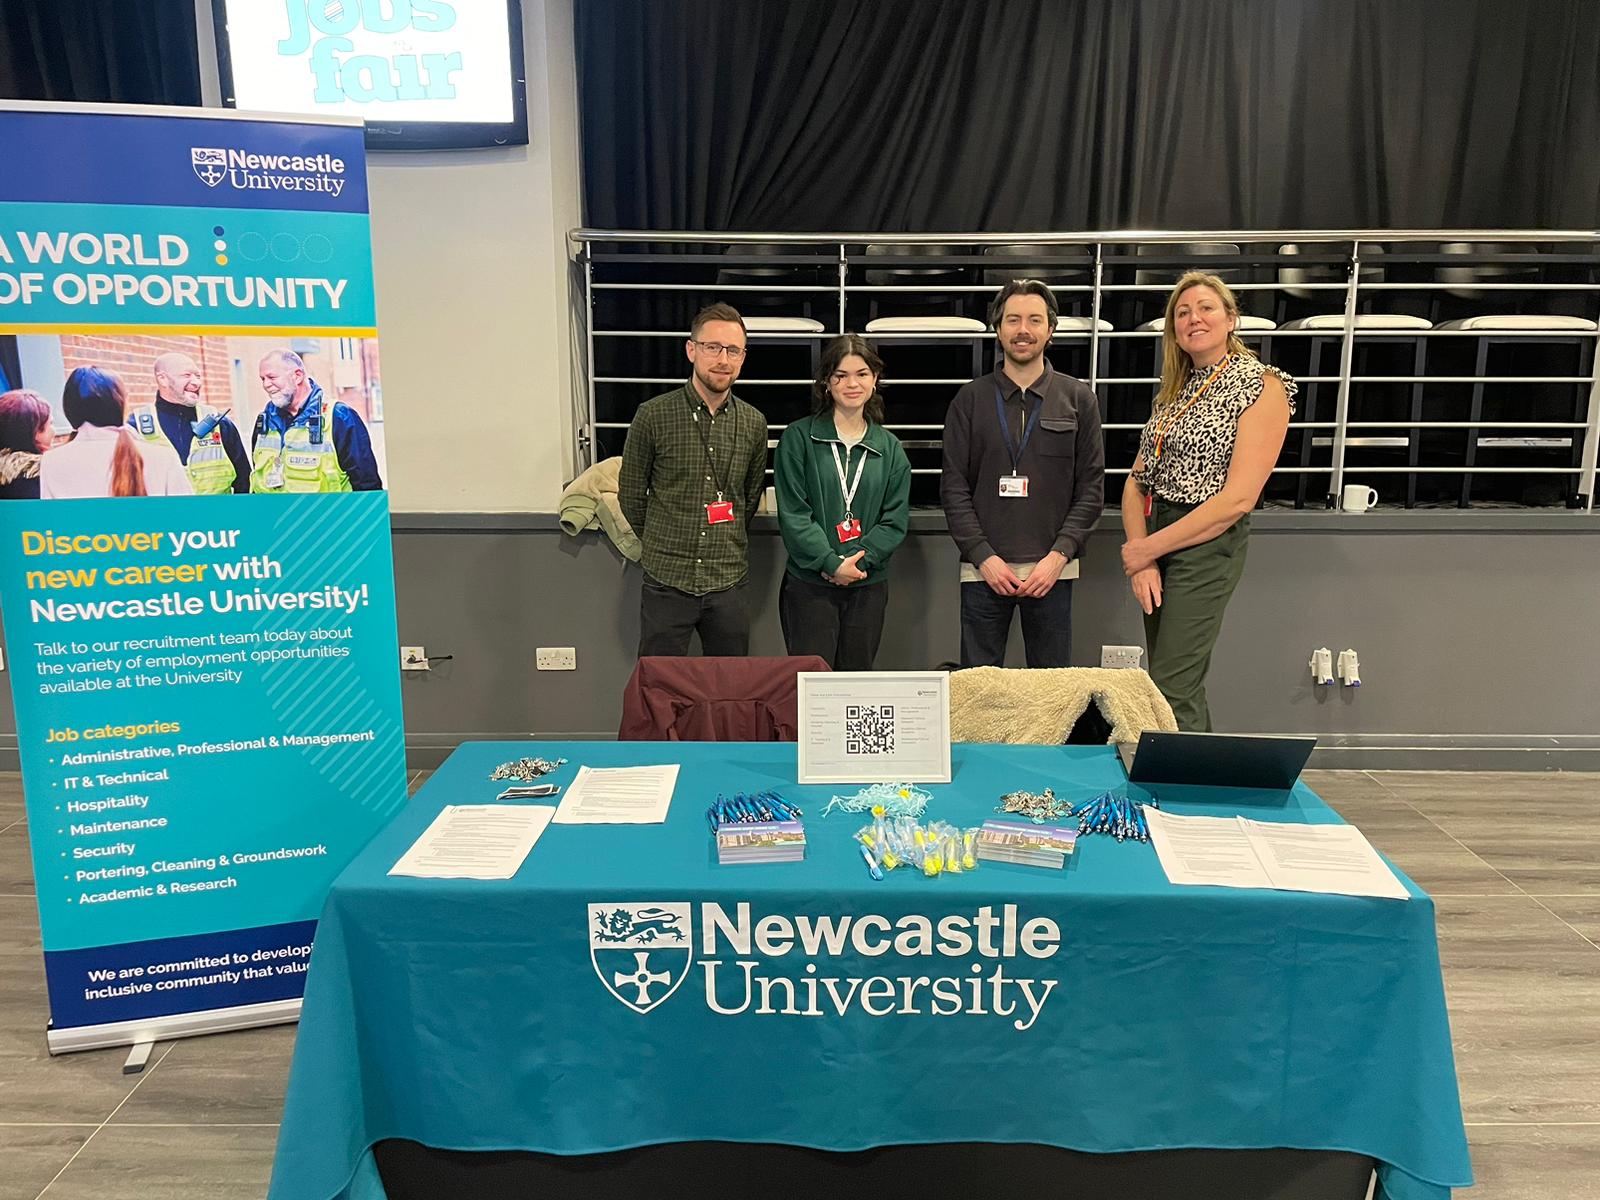 Newcastle University at our event in Newcastle